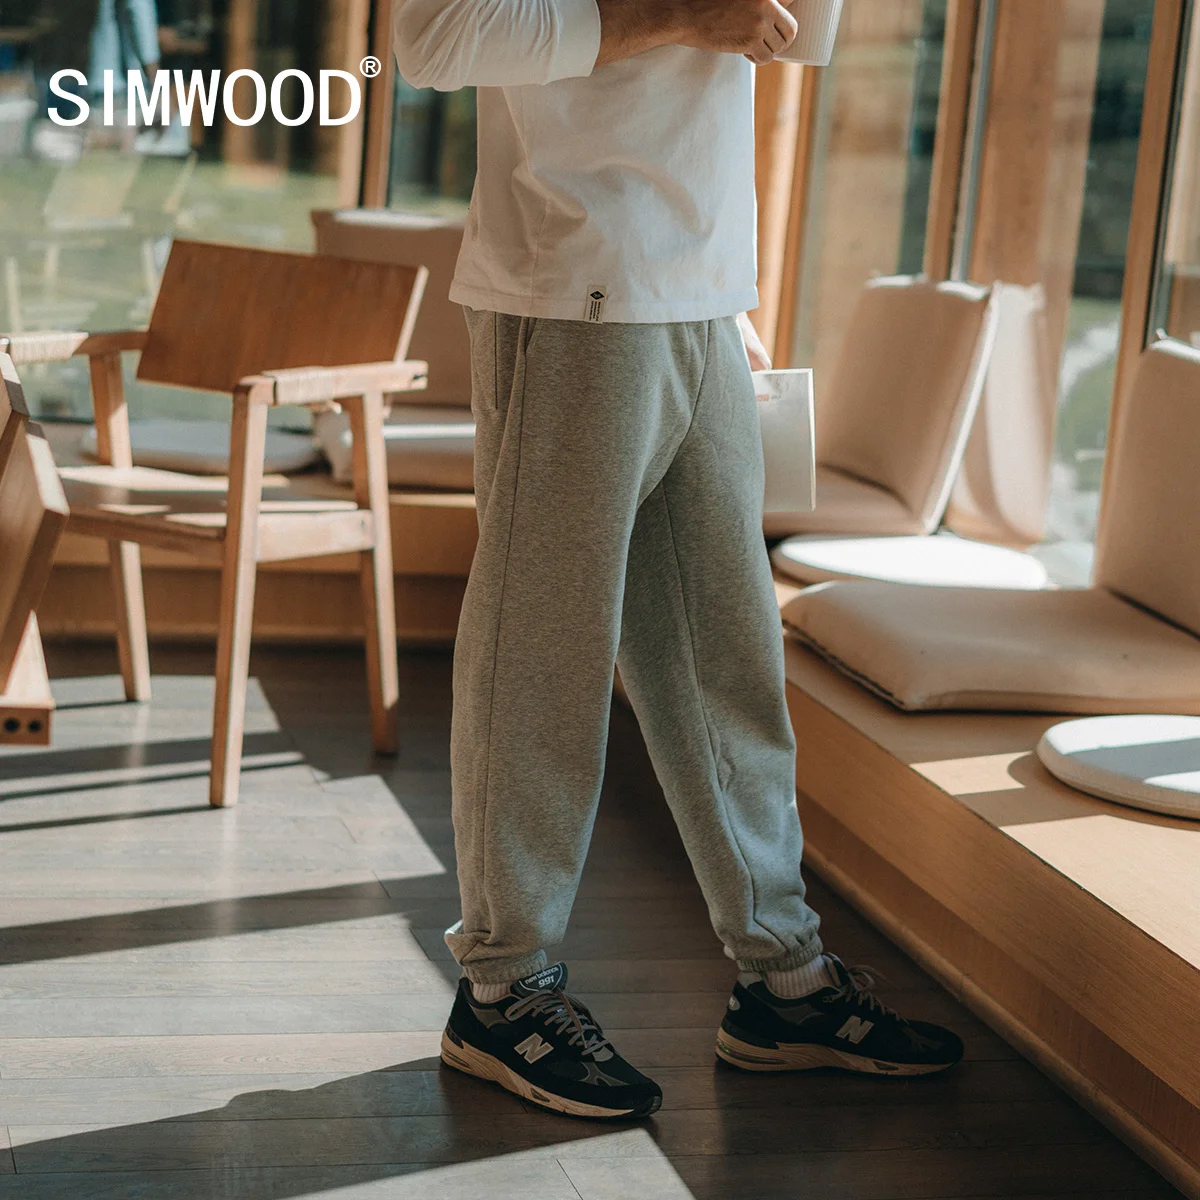 

SIMWOOD 2023 Spring Summer New Jogger Pants Men Drawstring Trousers Casual Comfortable Tracksuits Plus Size Gym Bottoms SJ130835